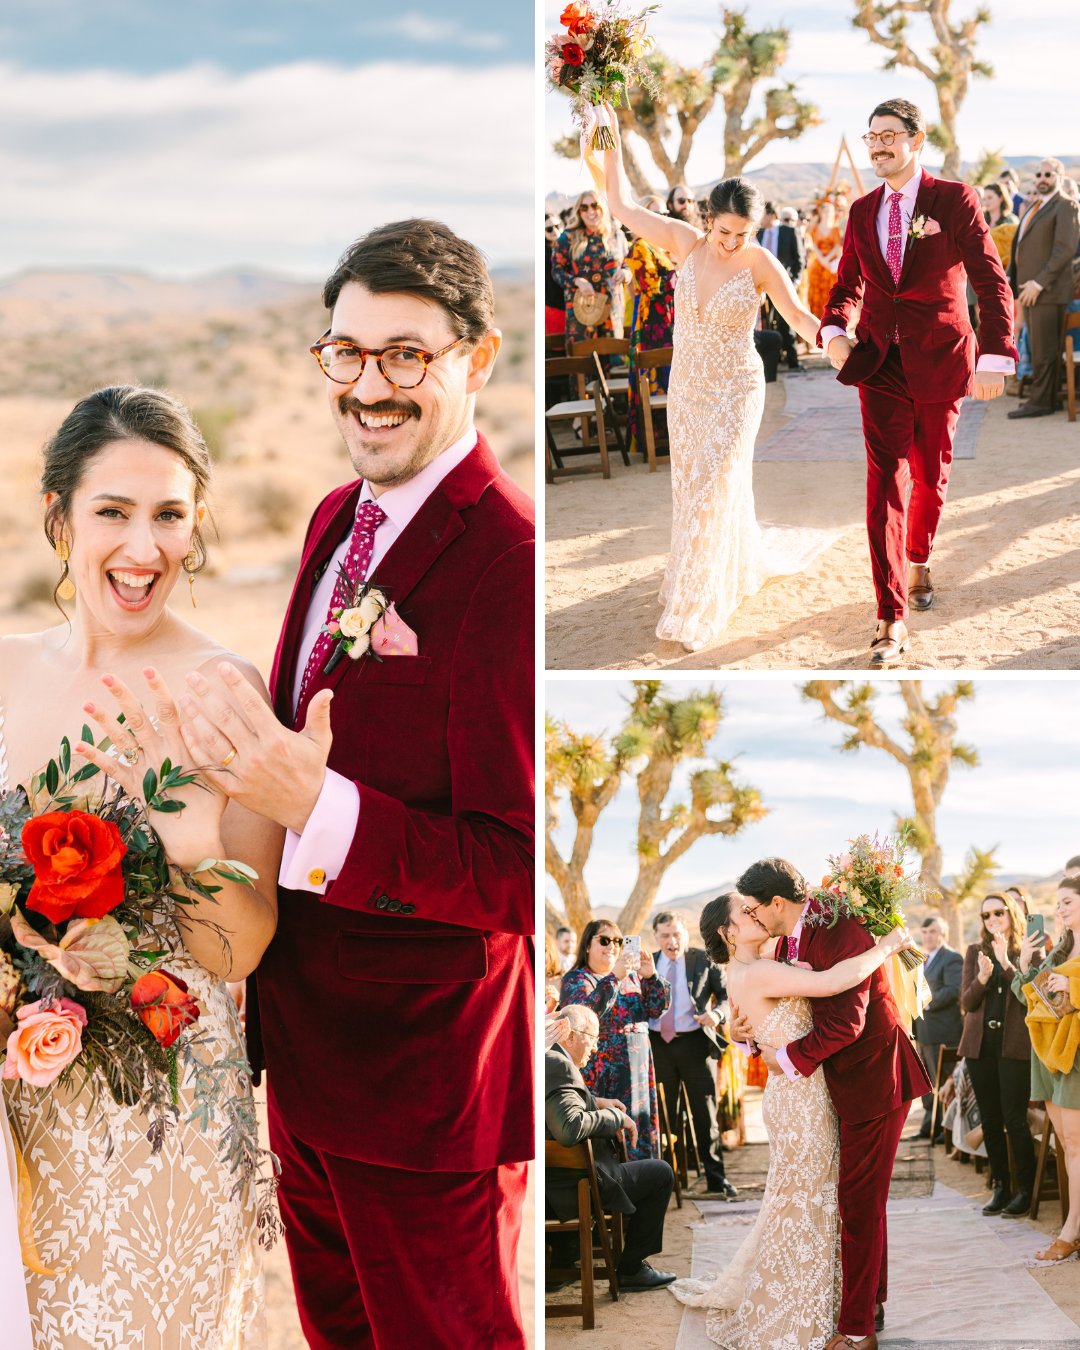 Kristen and TJ pose with their rings, walk down the aisle and kiss at the end